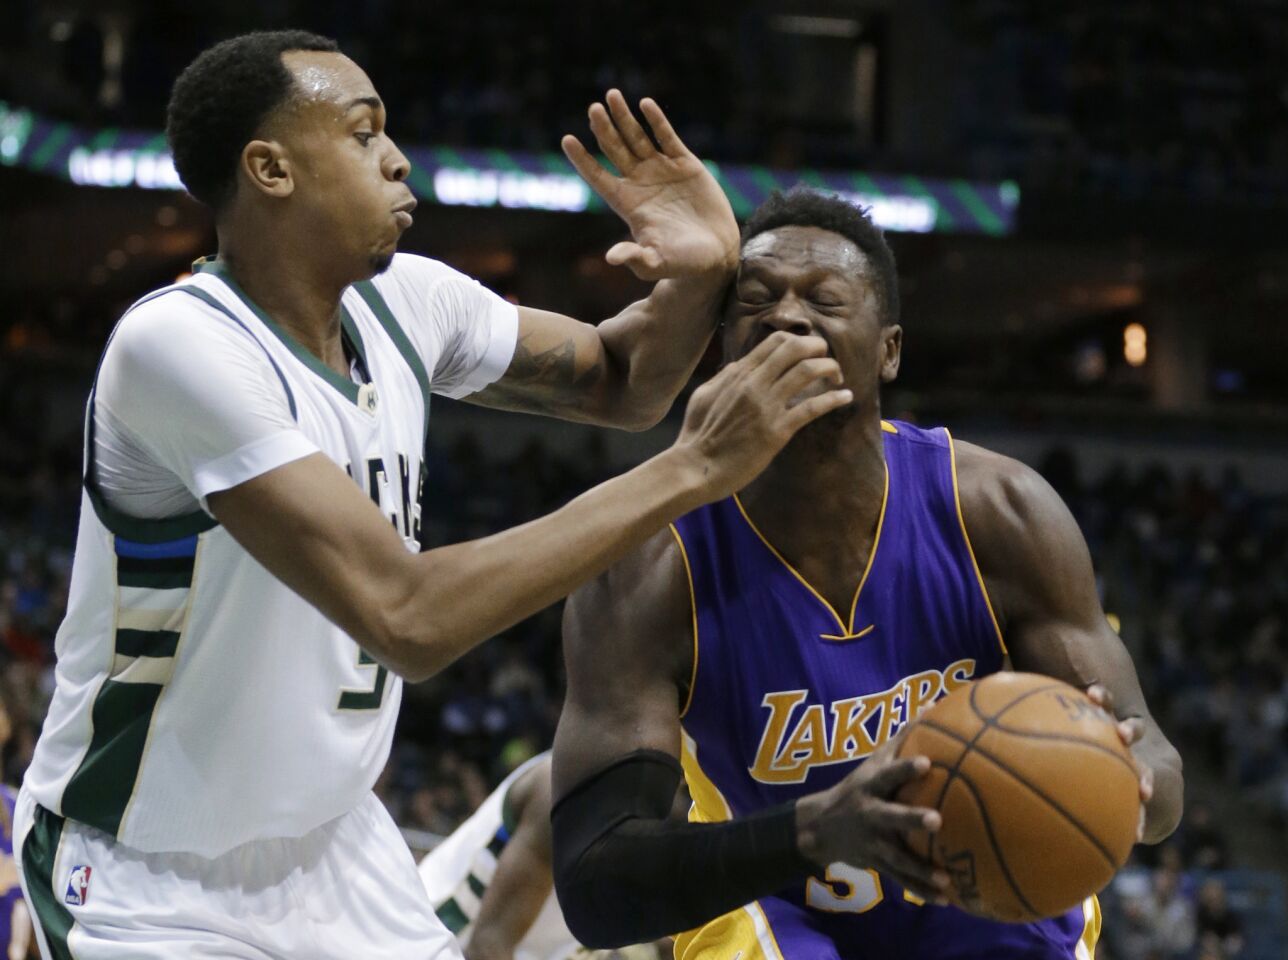 Lakers forward Julius Randle drives to the basket against Bucks center John Henson during the first half.